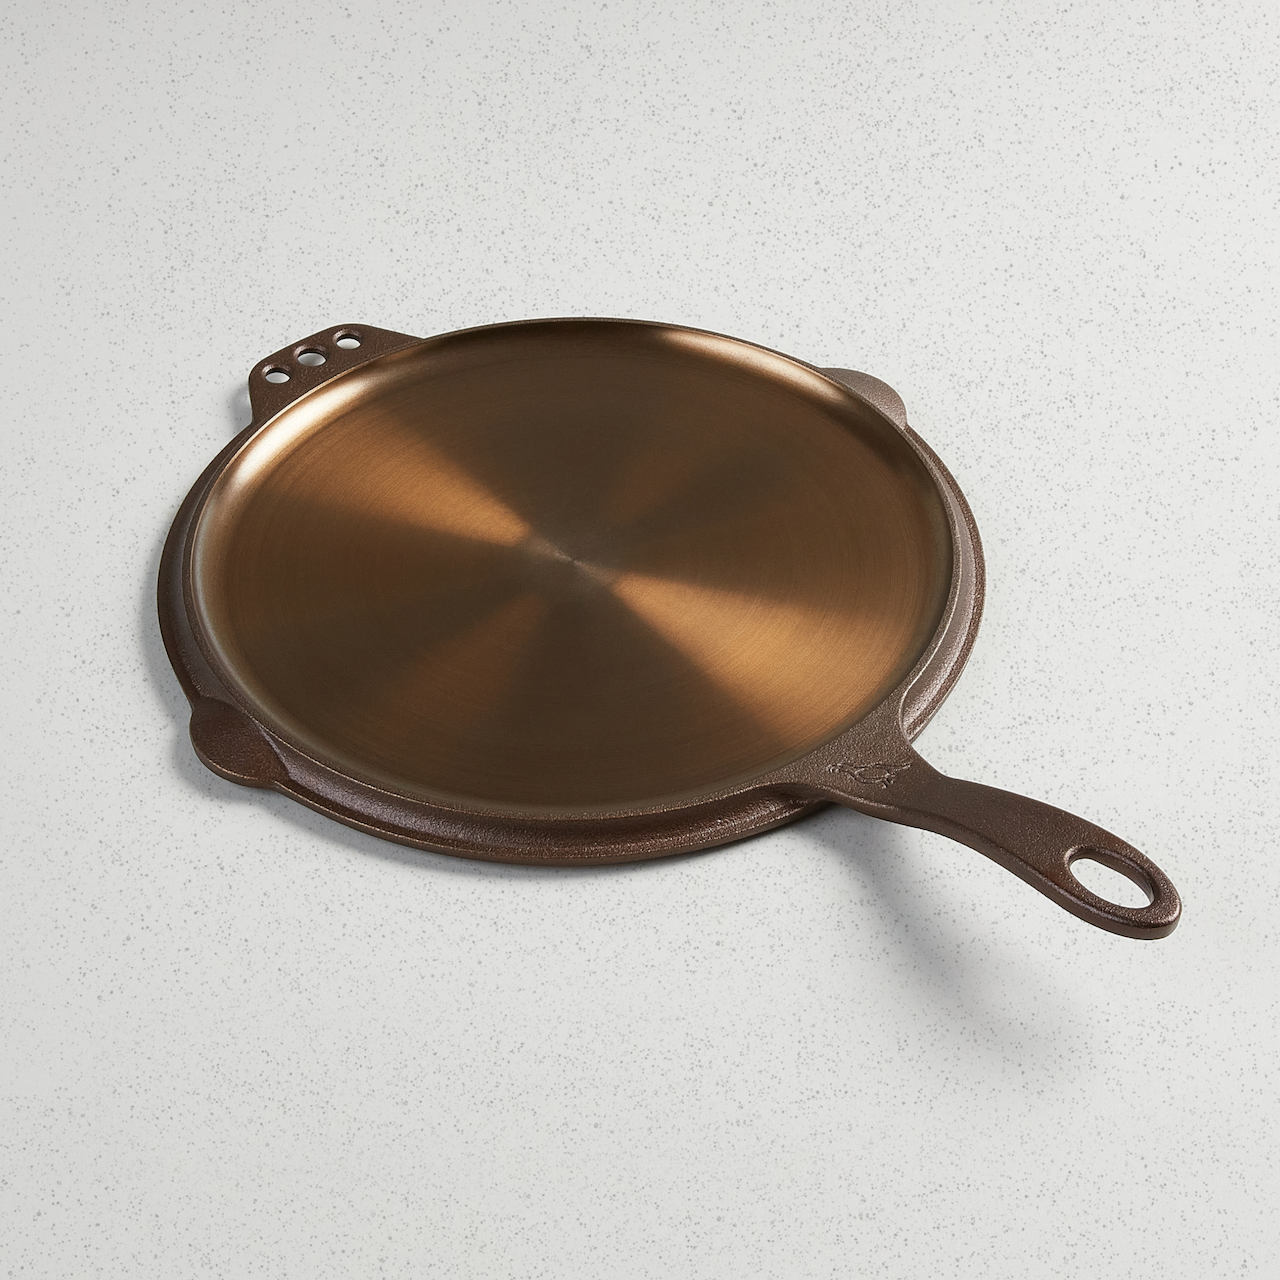 Smithey No. 12. Flat Top Cast Iron Griddle